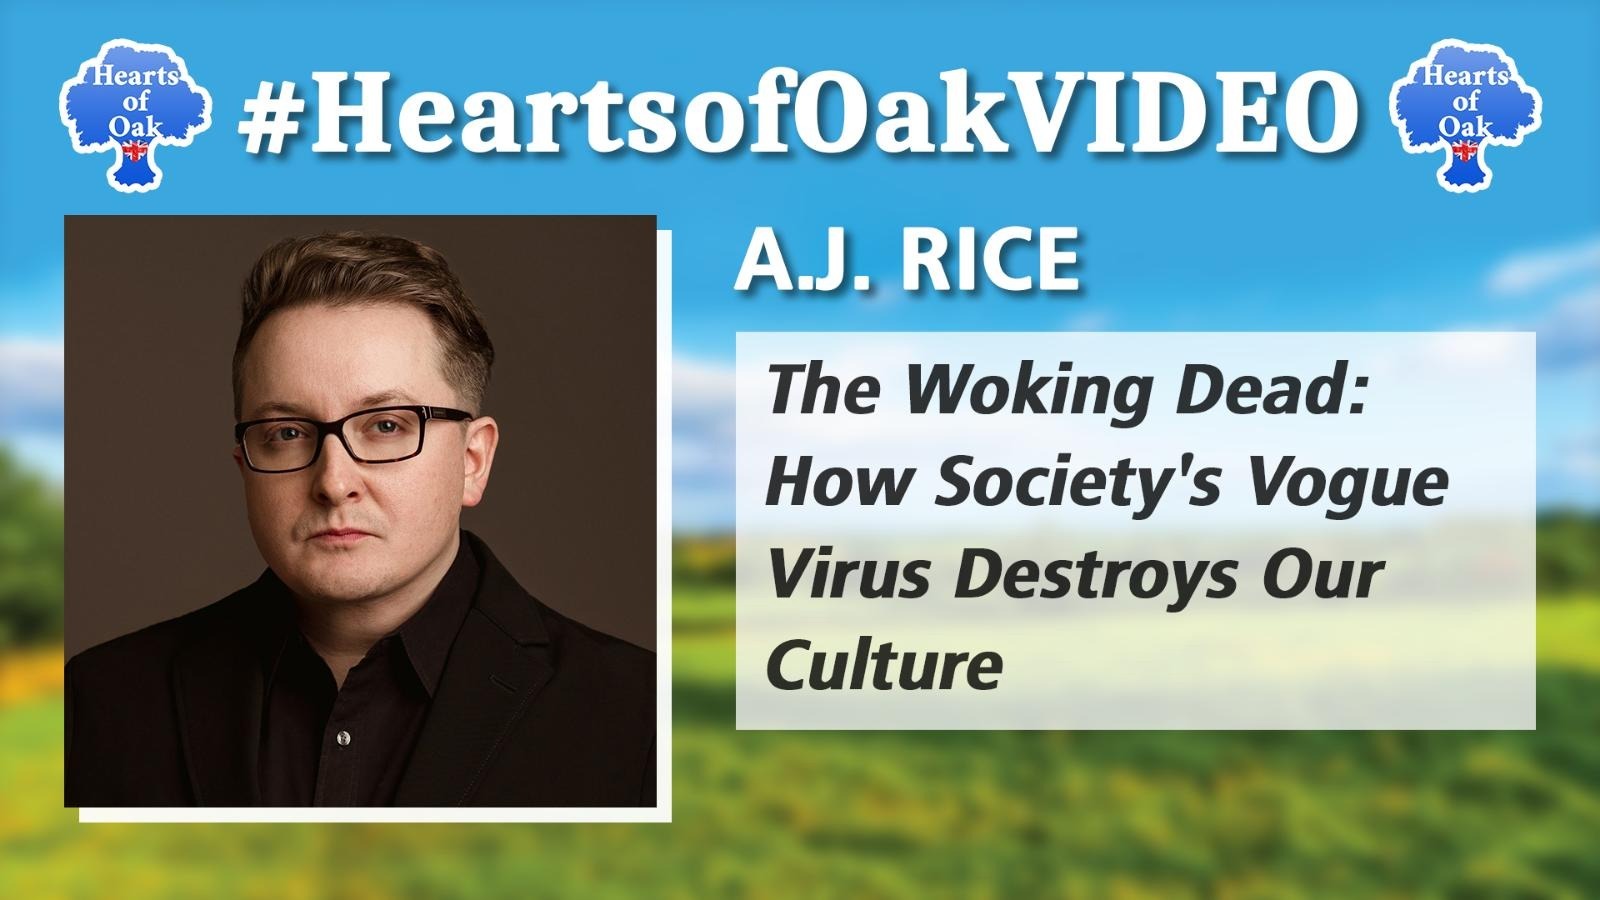 A.J. Rice - The Woking Dead: How Society's Vogue Virus Destroys Our Culture